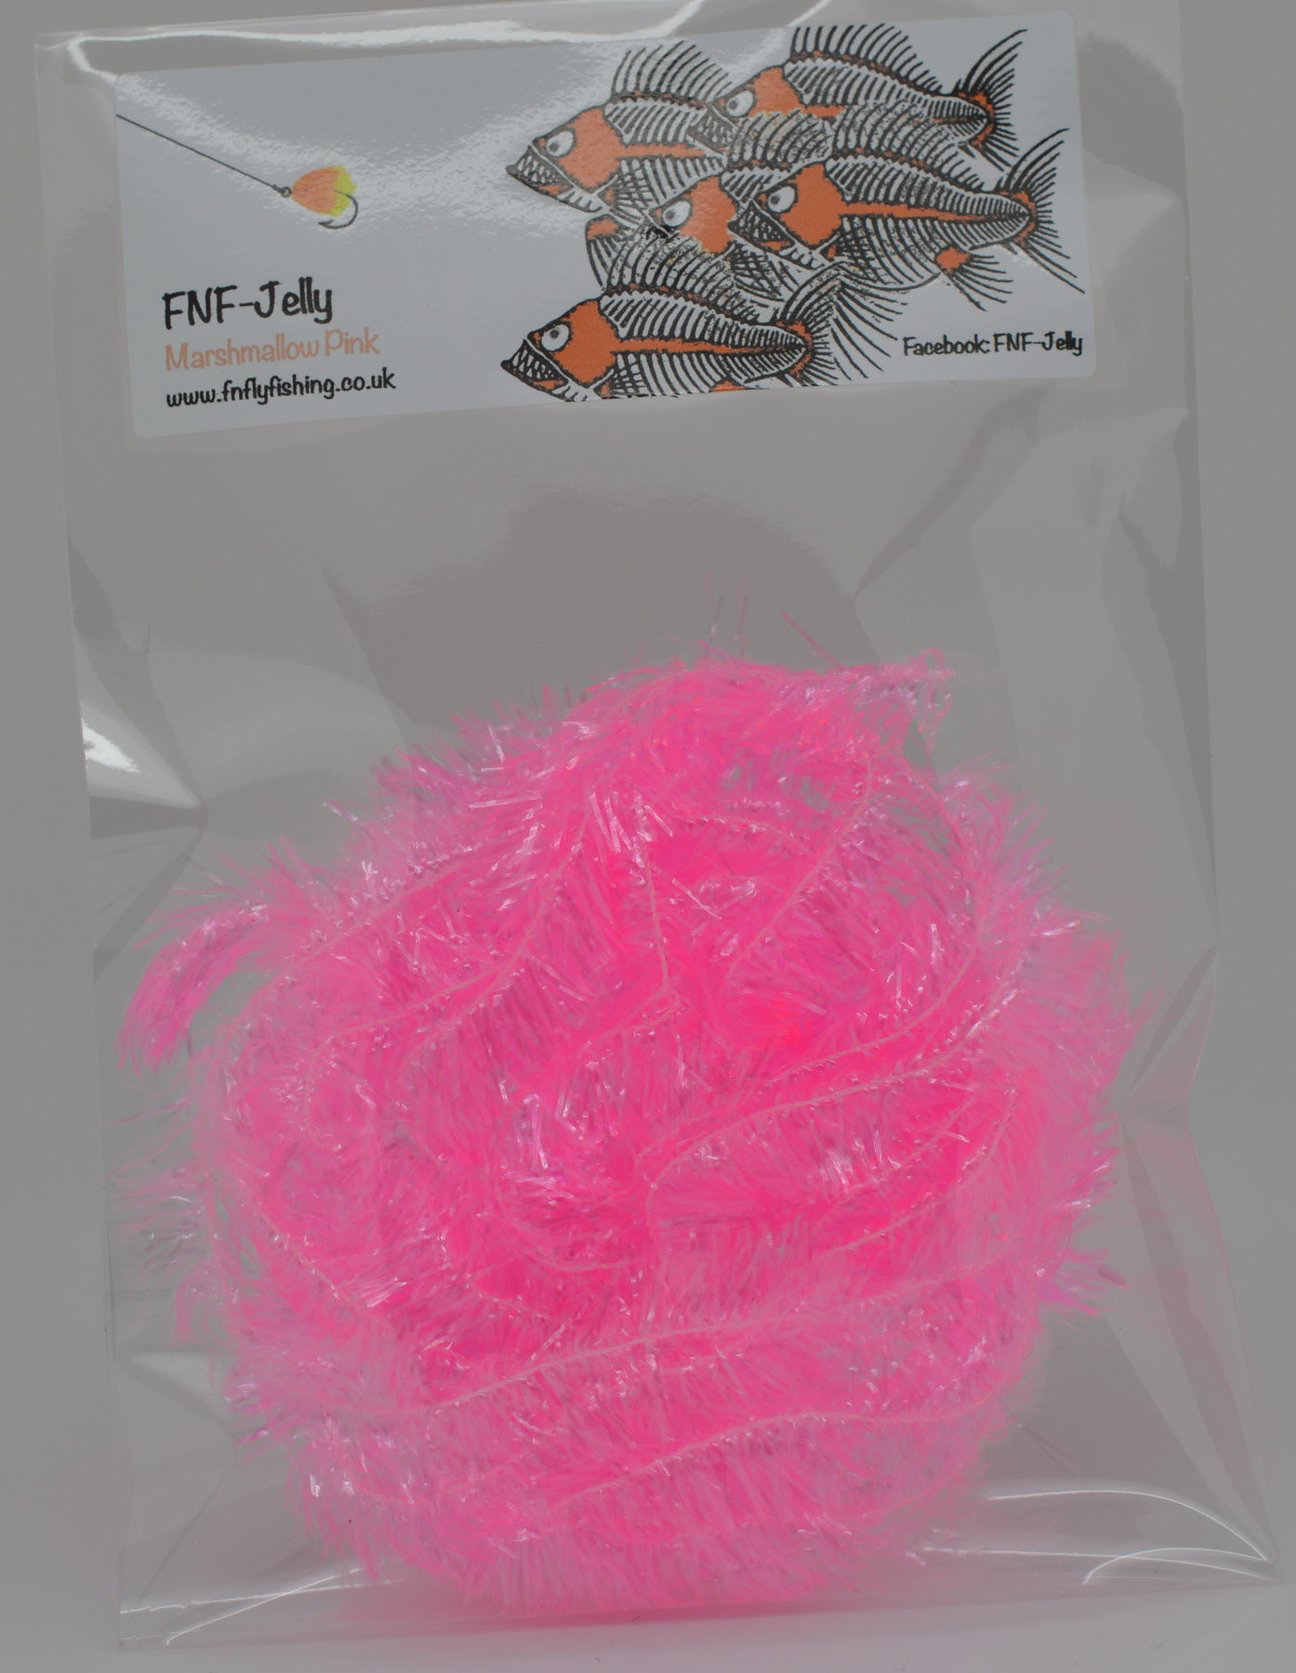 Frozen North Fly Fishing (FNF) Standard 15mm Fritz - Fly Tying